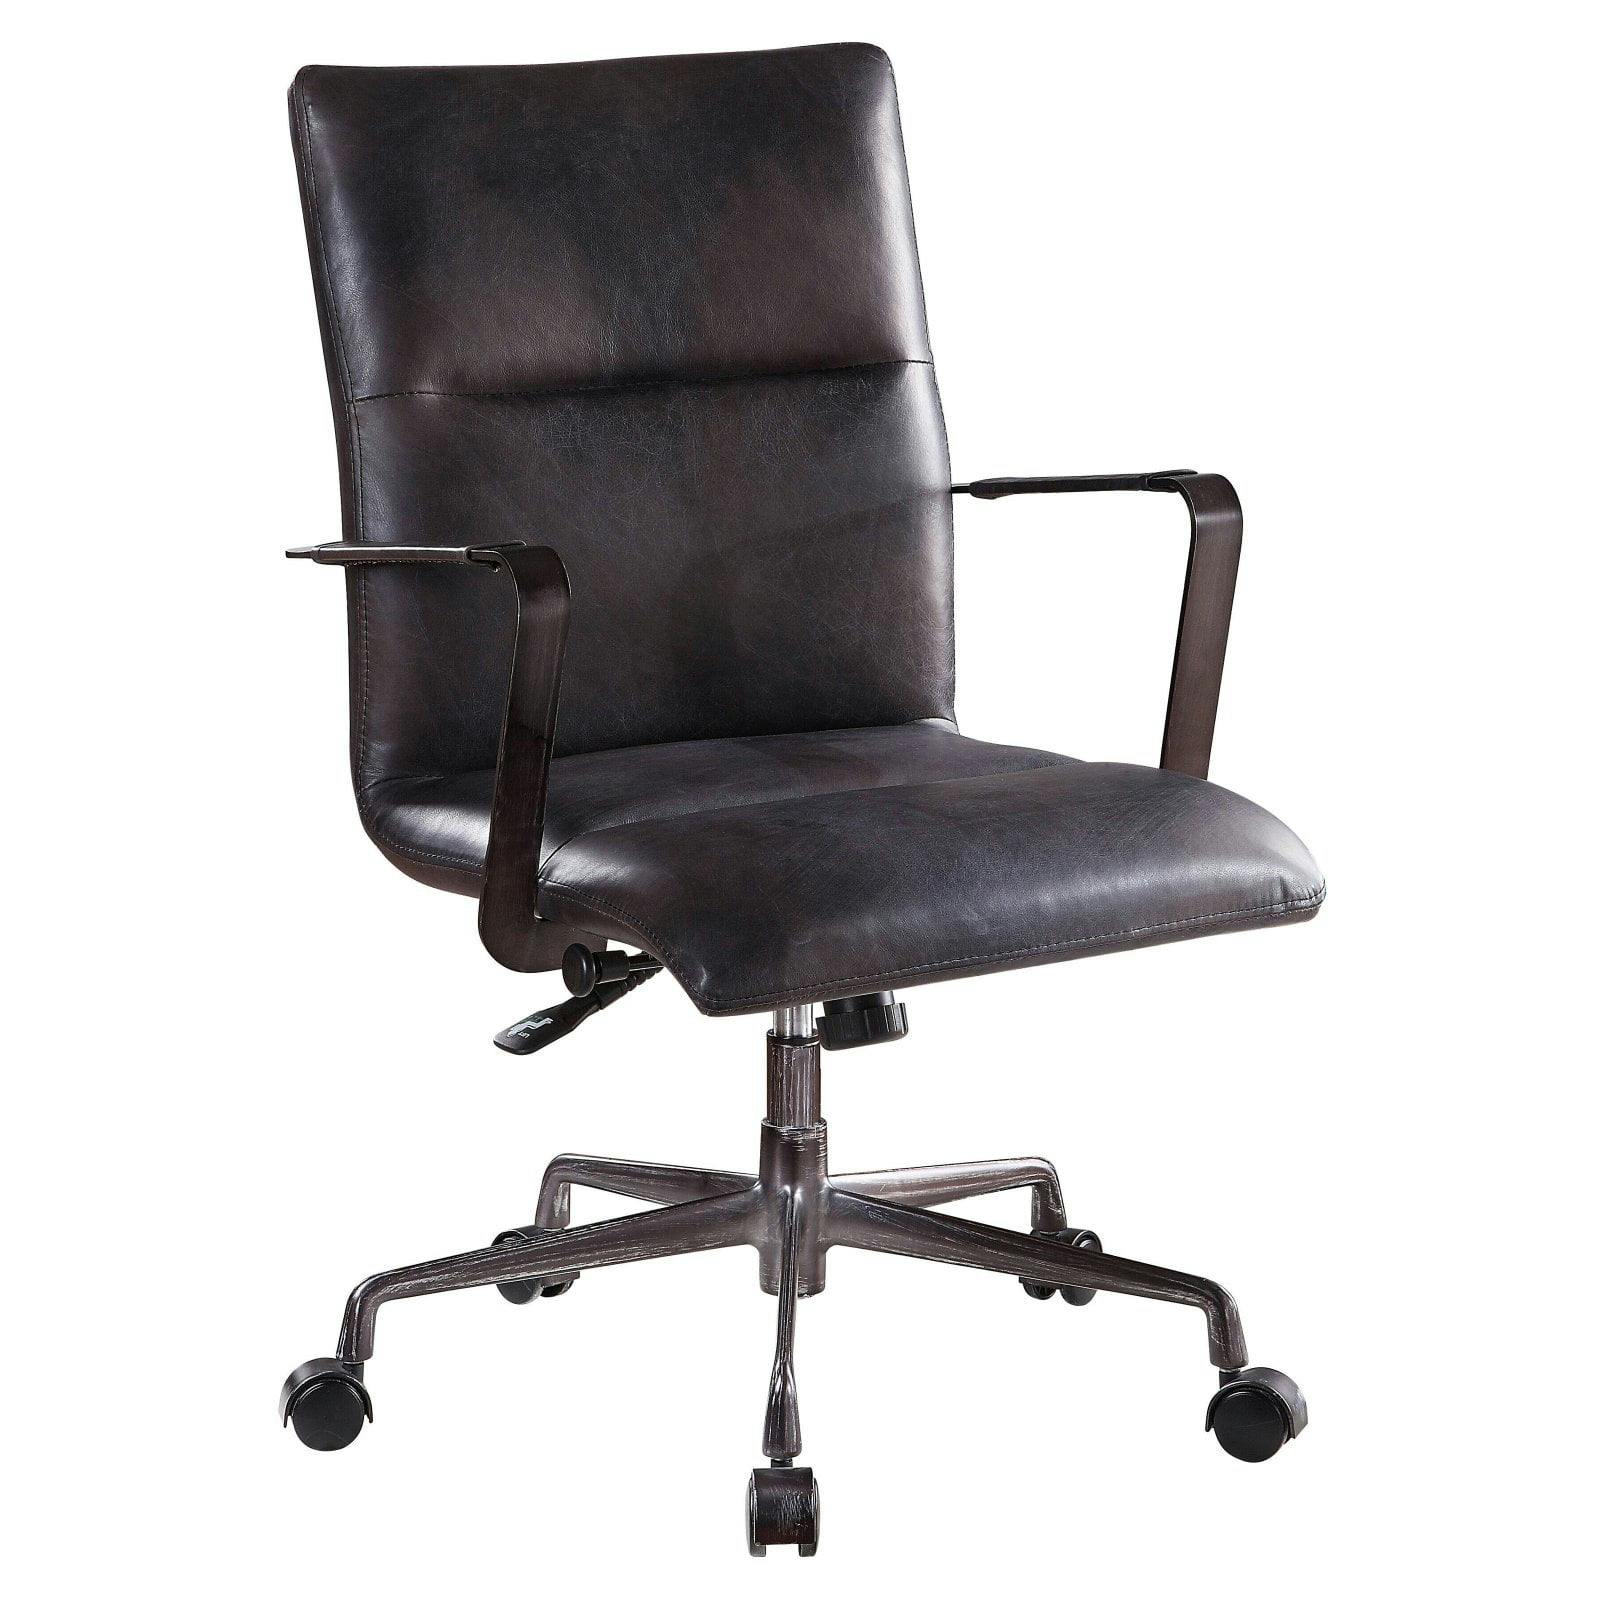 Onyx Black Top Grain Leather Executive Swivel Chair with Metal Wood Accents